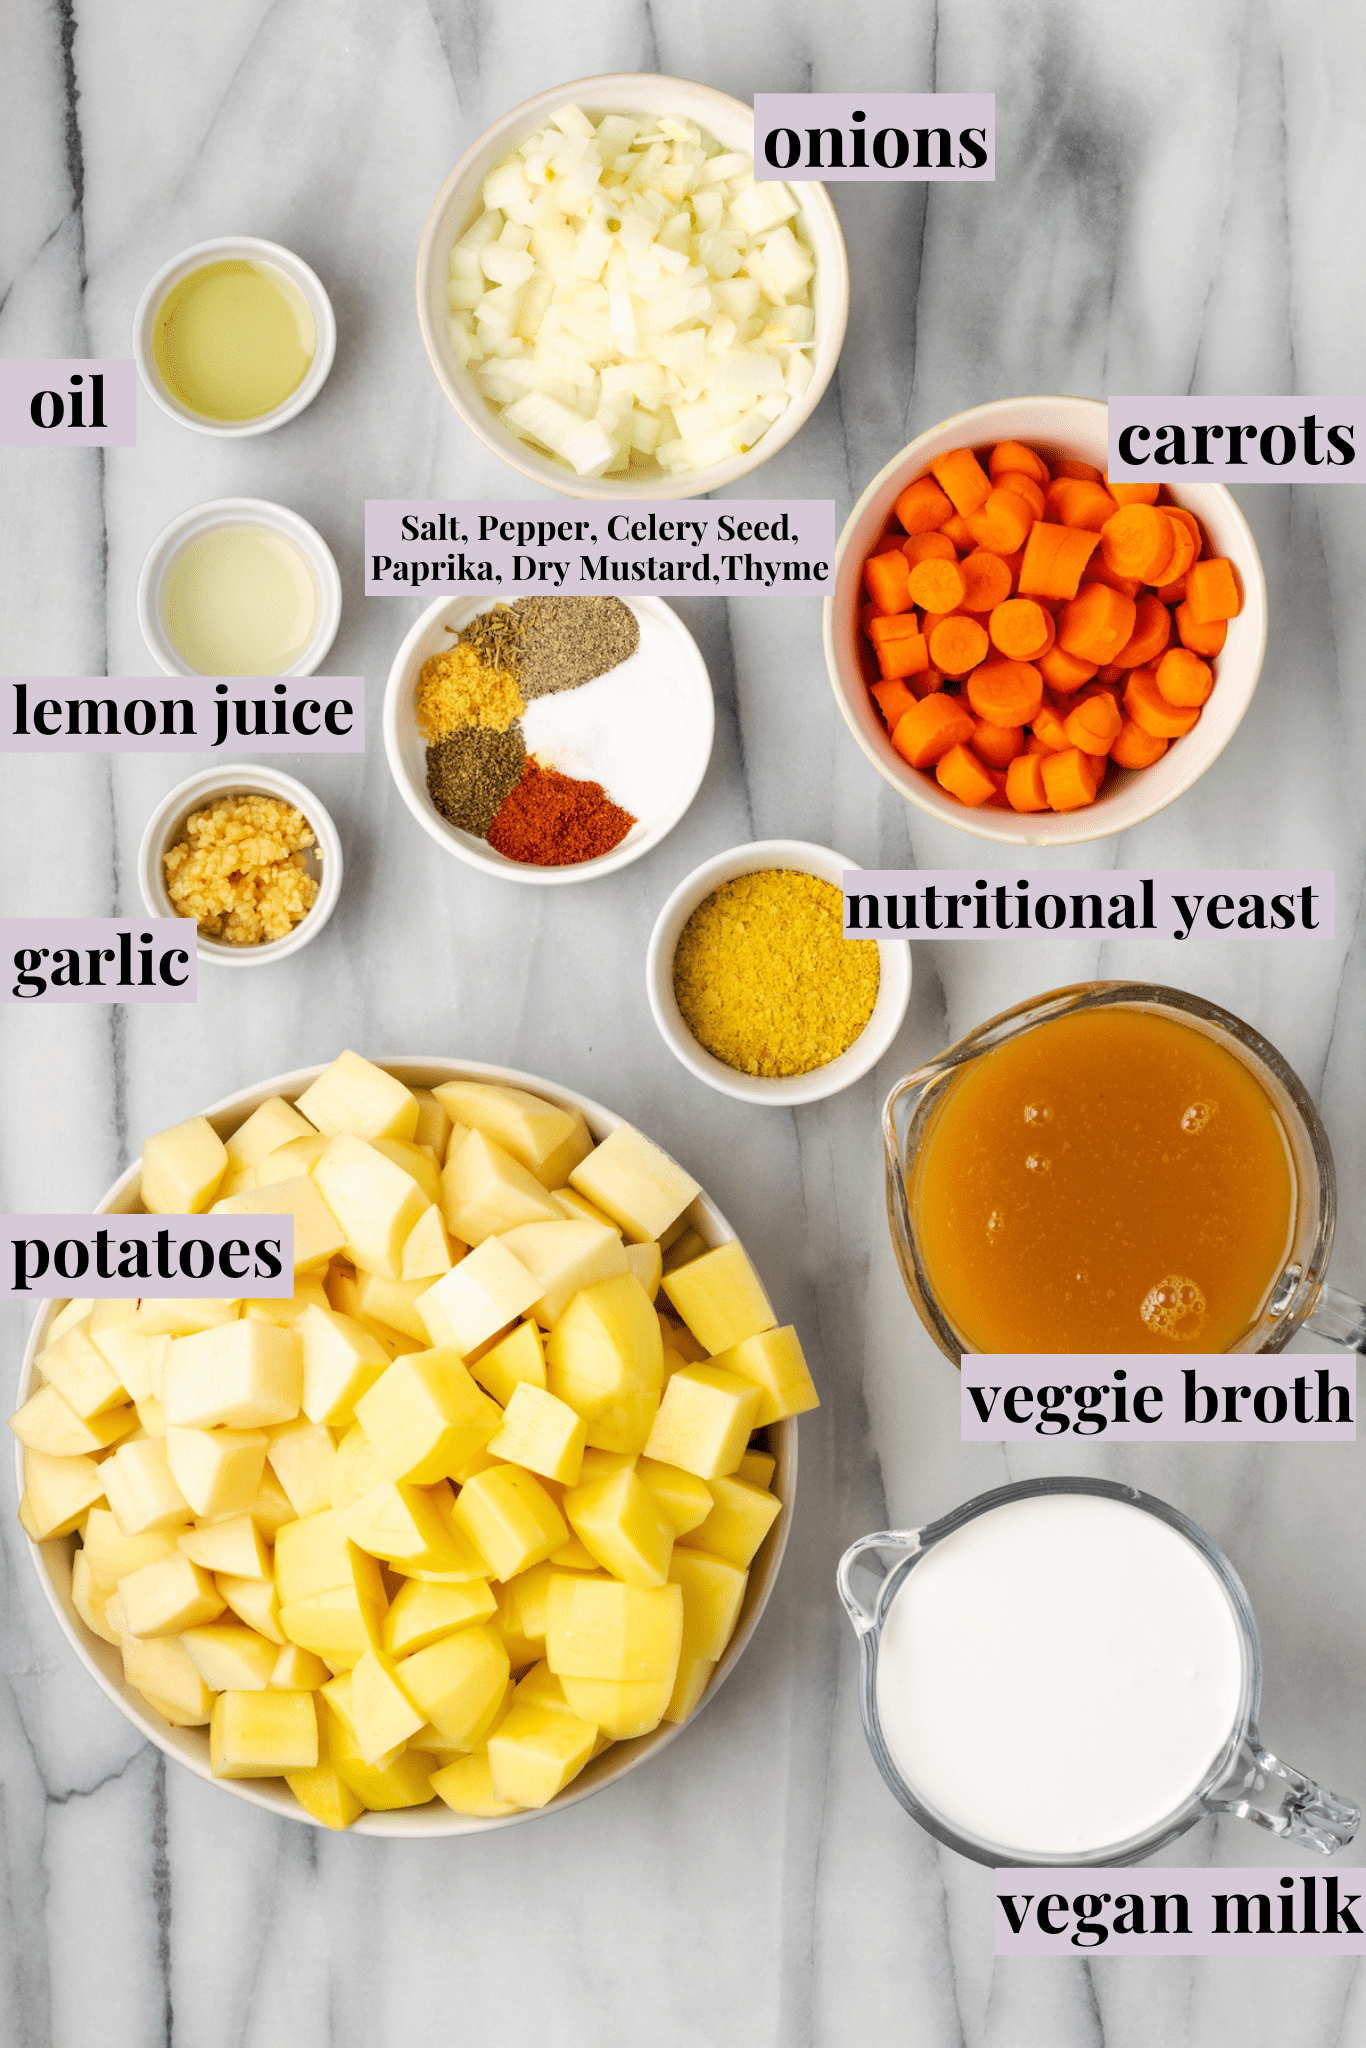 Overhead view of the labeled ingredients needed for potato soup: a bowl of oil, a bowl of onions, a bowl of carrots, a bowl of potatoes, a bowl of veggie broth, a bowl of nutritional yeast, a bowl of vegan milk, a bowl of garlic, a bowl of lemon juice, and a bowl of salt, pepper, thyme paprika, celery seed, and dry mustard